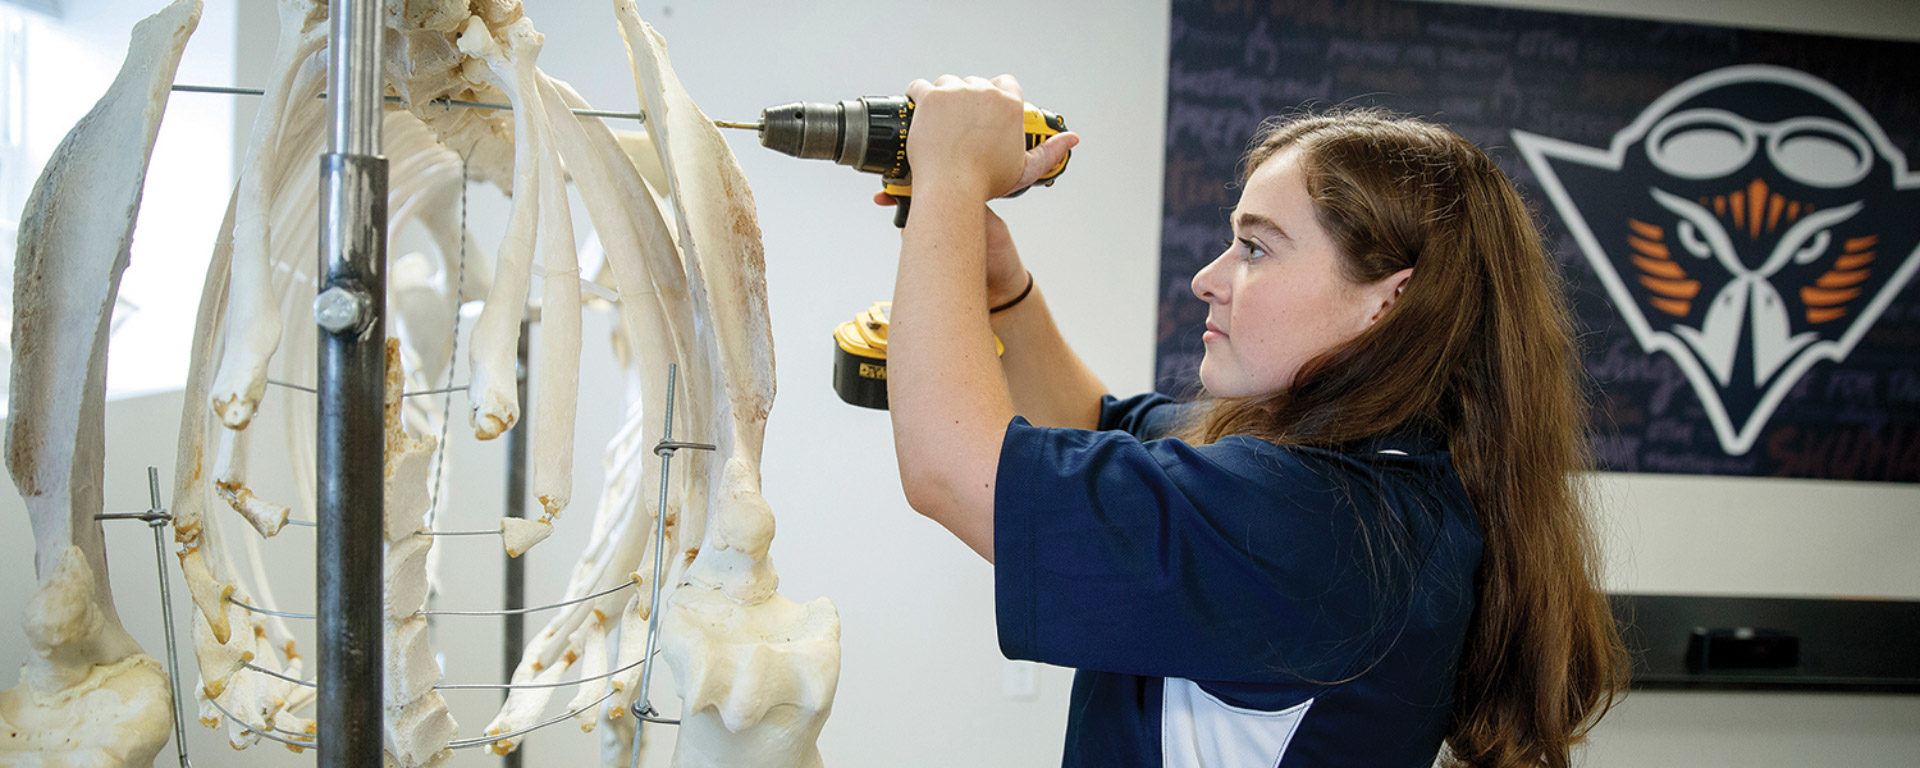 Savannah Matheny uses a power drill to assemble a horse skeleton named Ron